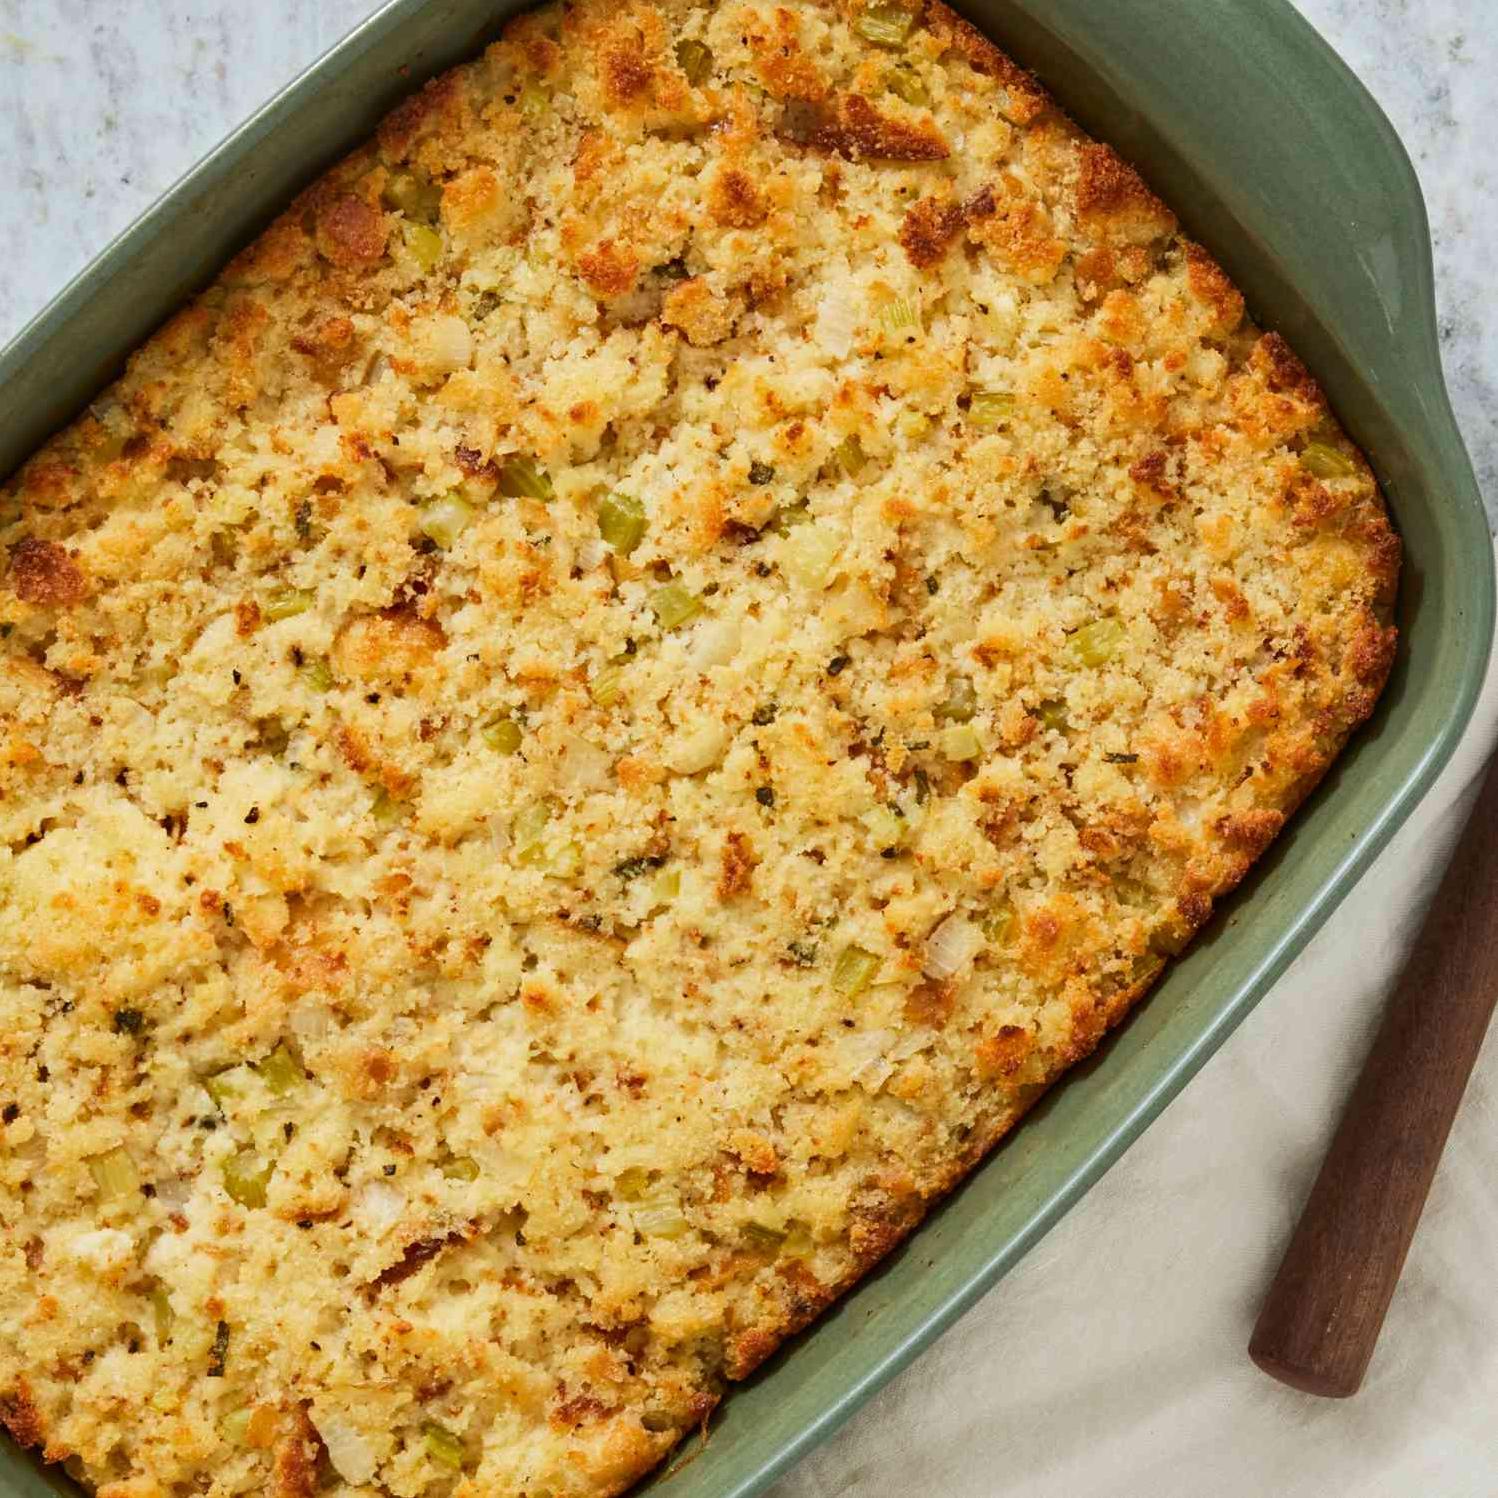  Get ready to indulge in the savory flavors of the South with this Cornbread Stuffing recipe!